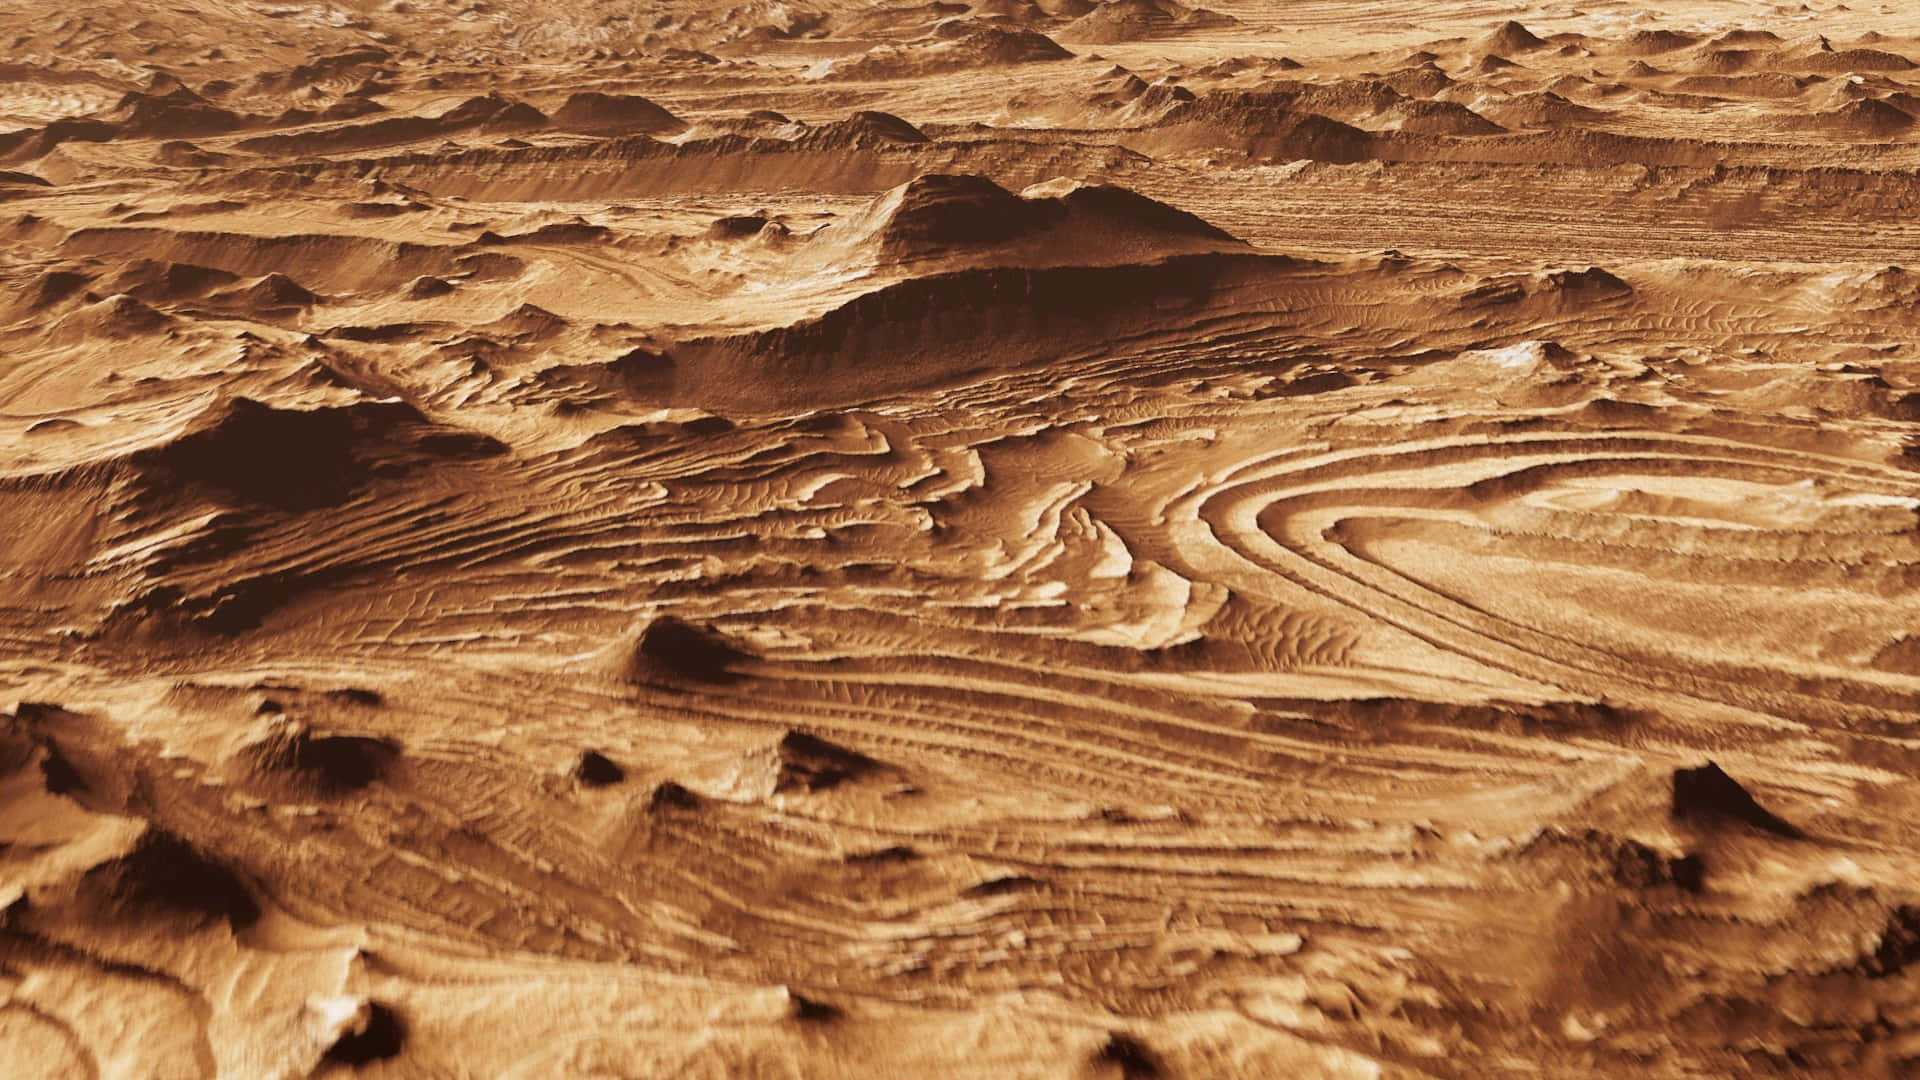 Spectacular Mars Landscape featuring towering mountains and vast valley Wallpaper